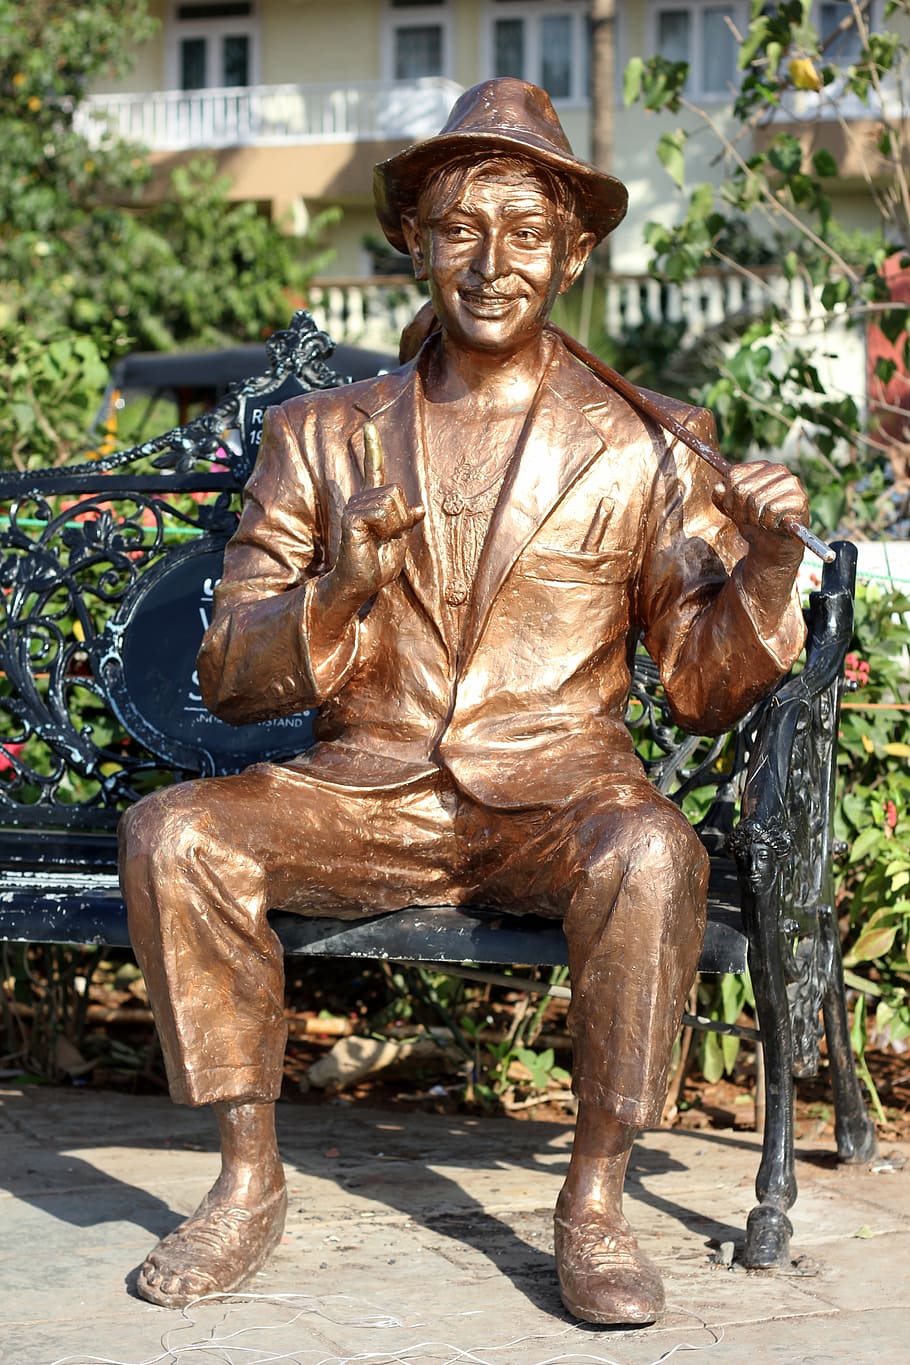 bollywood, kapoor, raj, actor, bench, statue, brown, copper, india, sitting